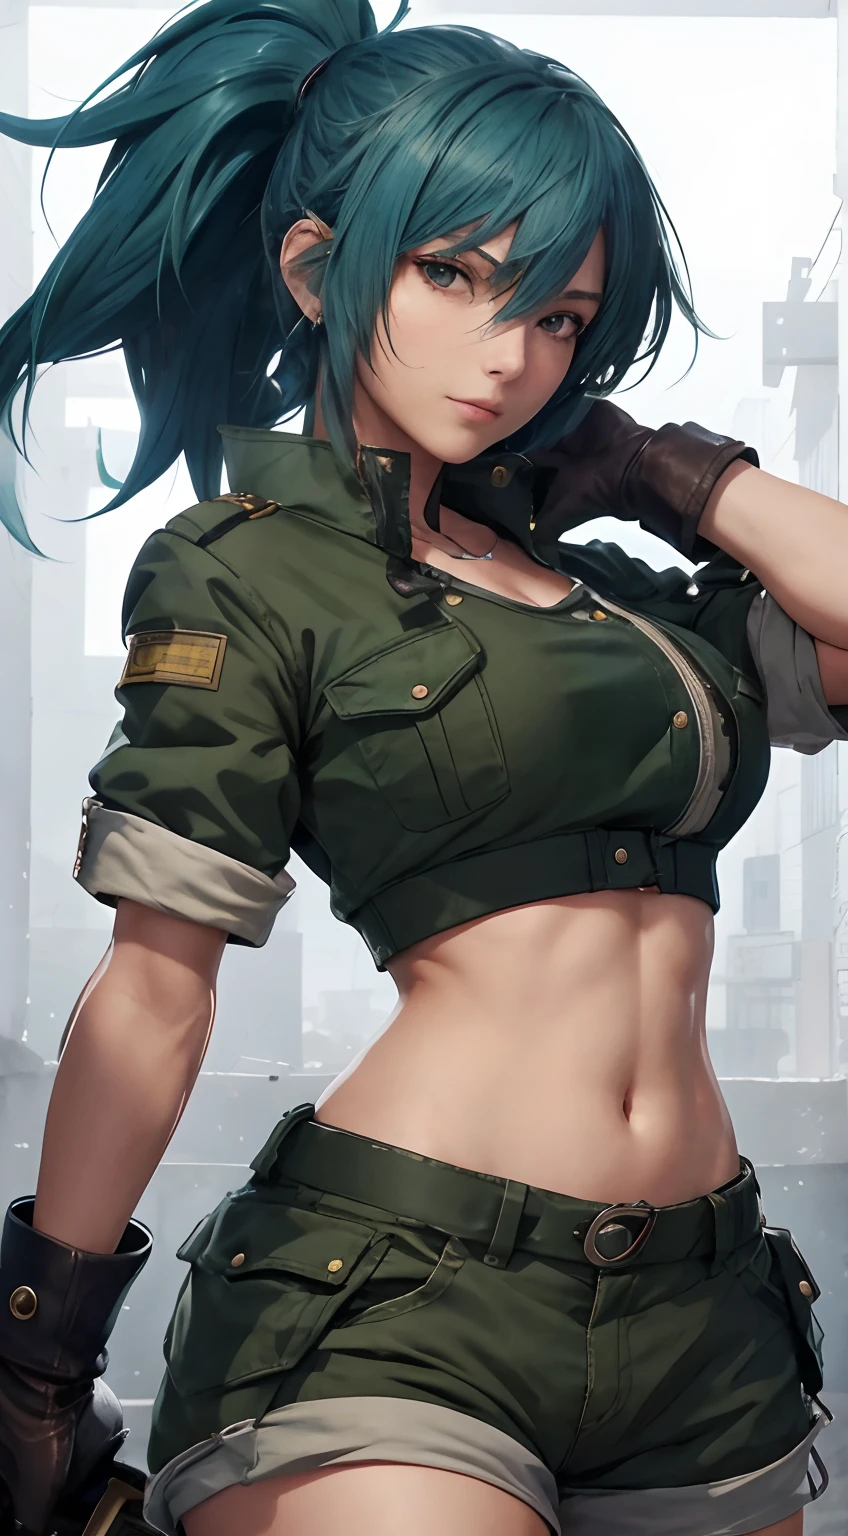 Masterpiece artwork,, best qualityer, highres, 1girl, Leona Heidern, hair blue, blue colored eyes, hypdertailed, shorts verdes, midriff, crop top, black gloves, breastsout, military dress uniform, green jacket, aretes, jewelly, へそ, breastsout grandes, tiro de cowboy, realistic